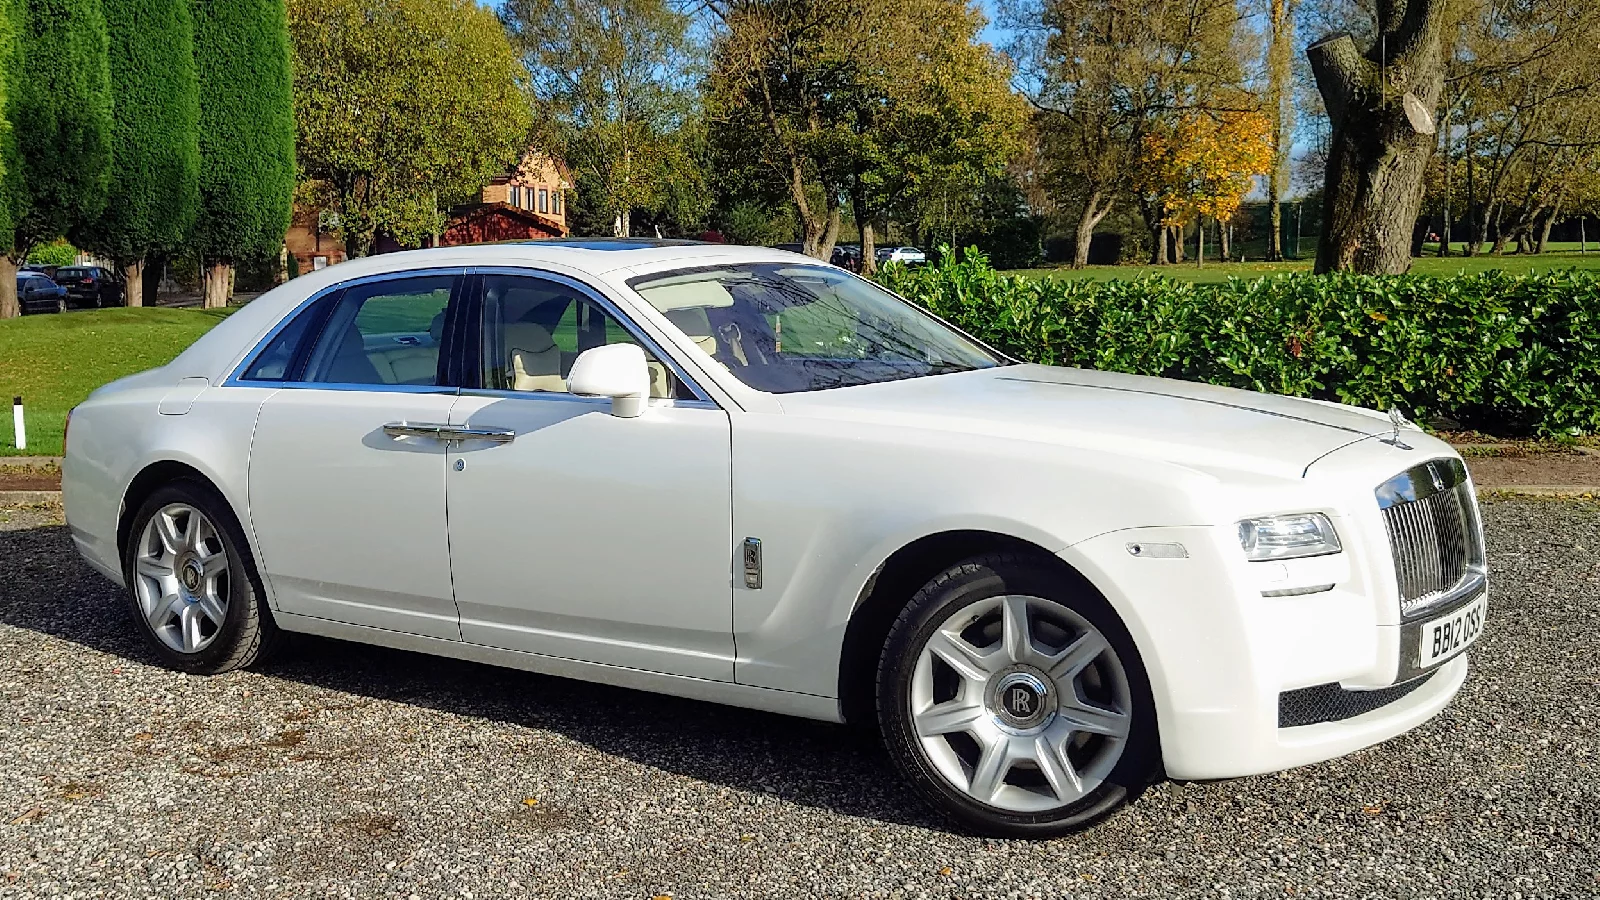 White rolls-Royce Ghost for hire in Yorkshire